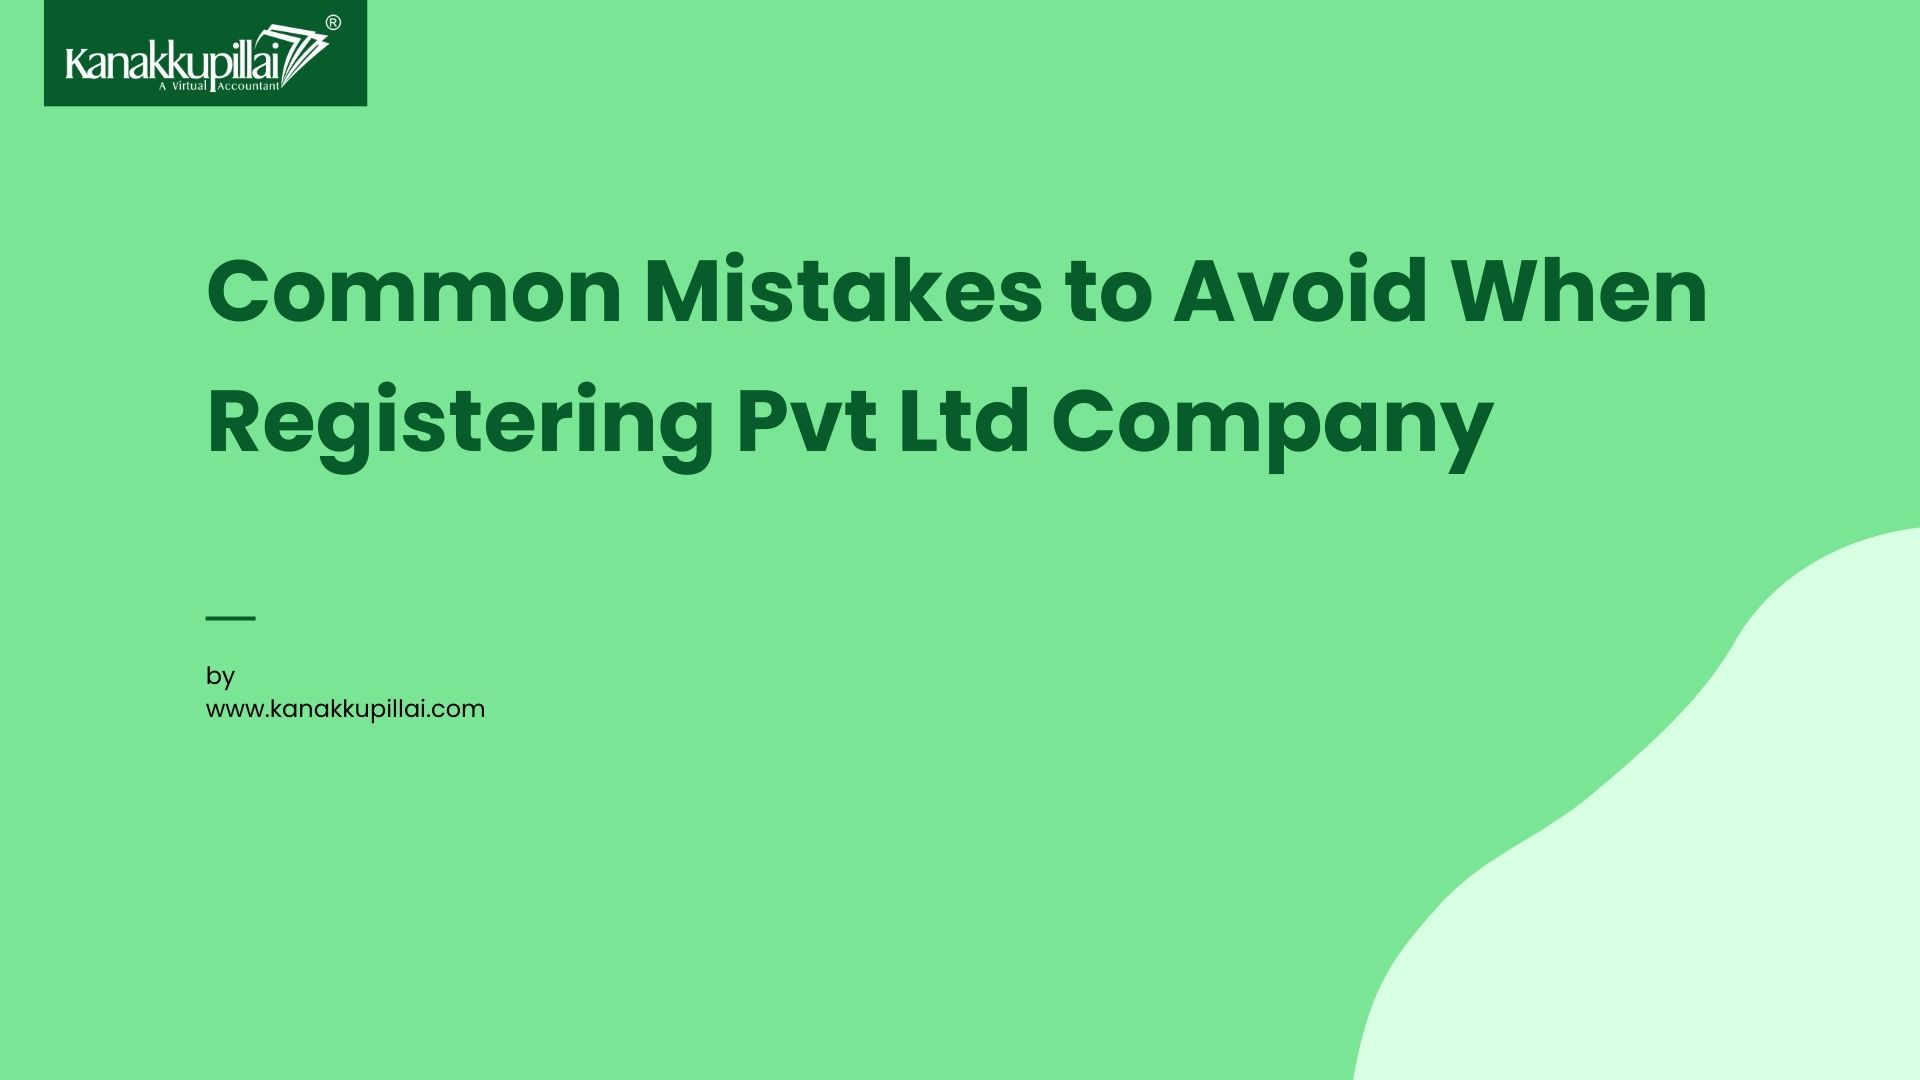 Common Mistakes to Avoid When Registering Pvt Ltd Company in Chennai